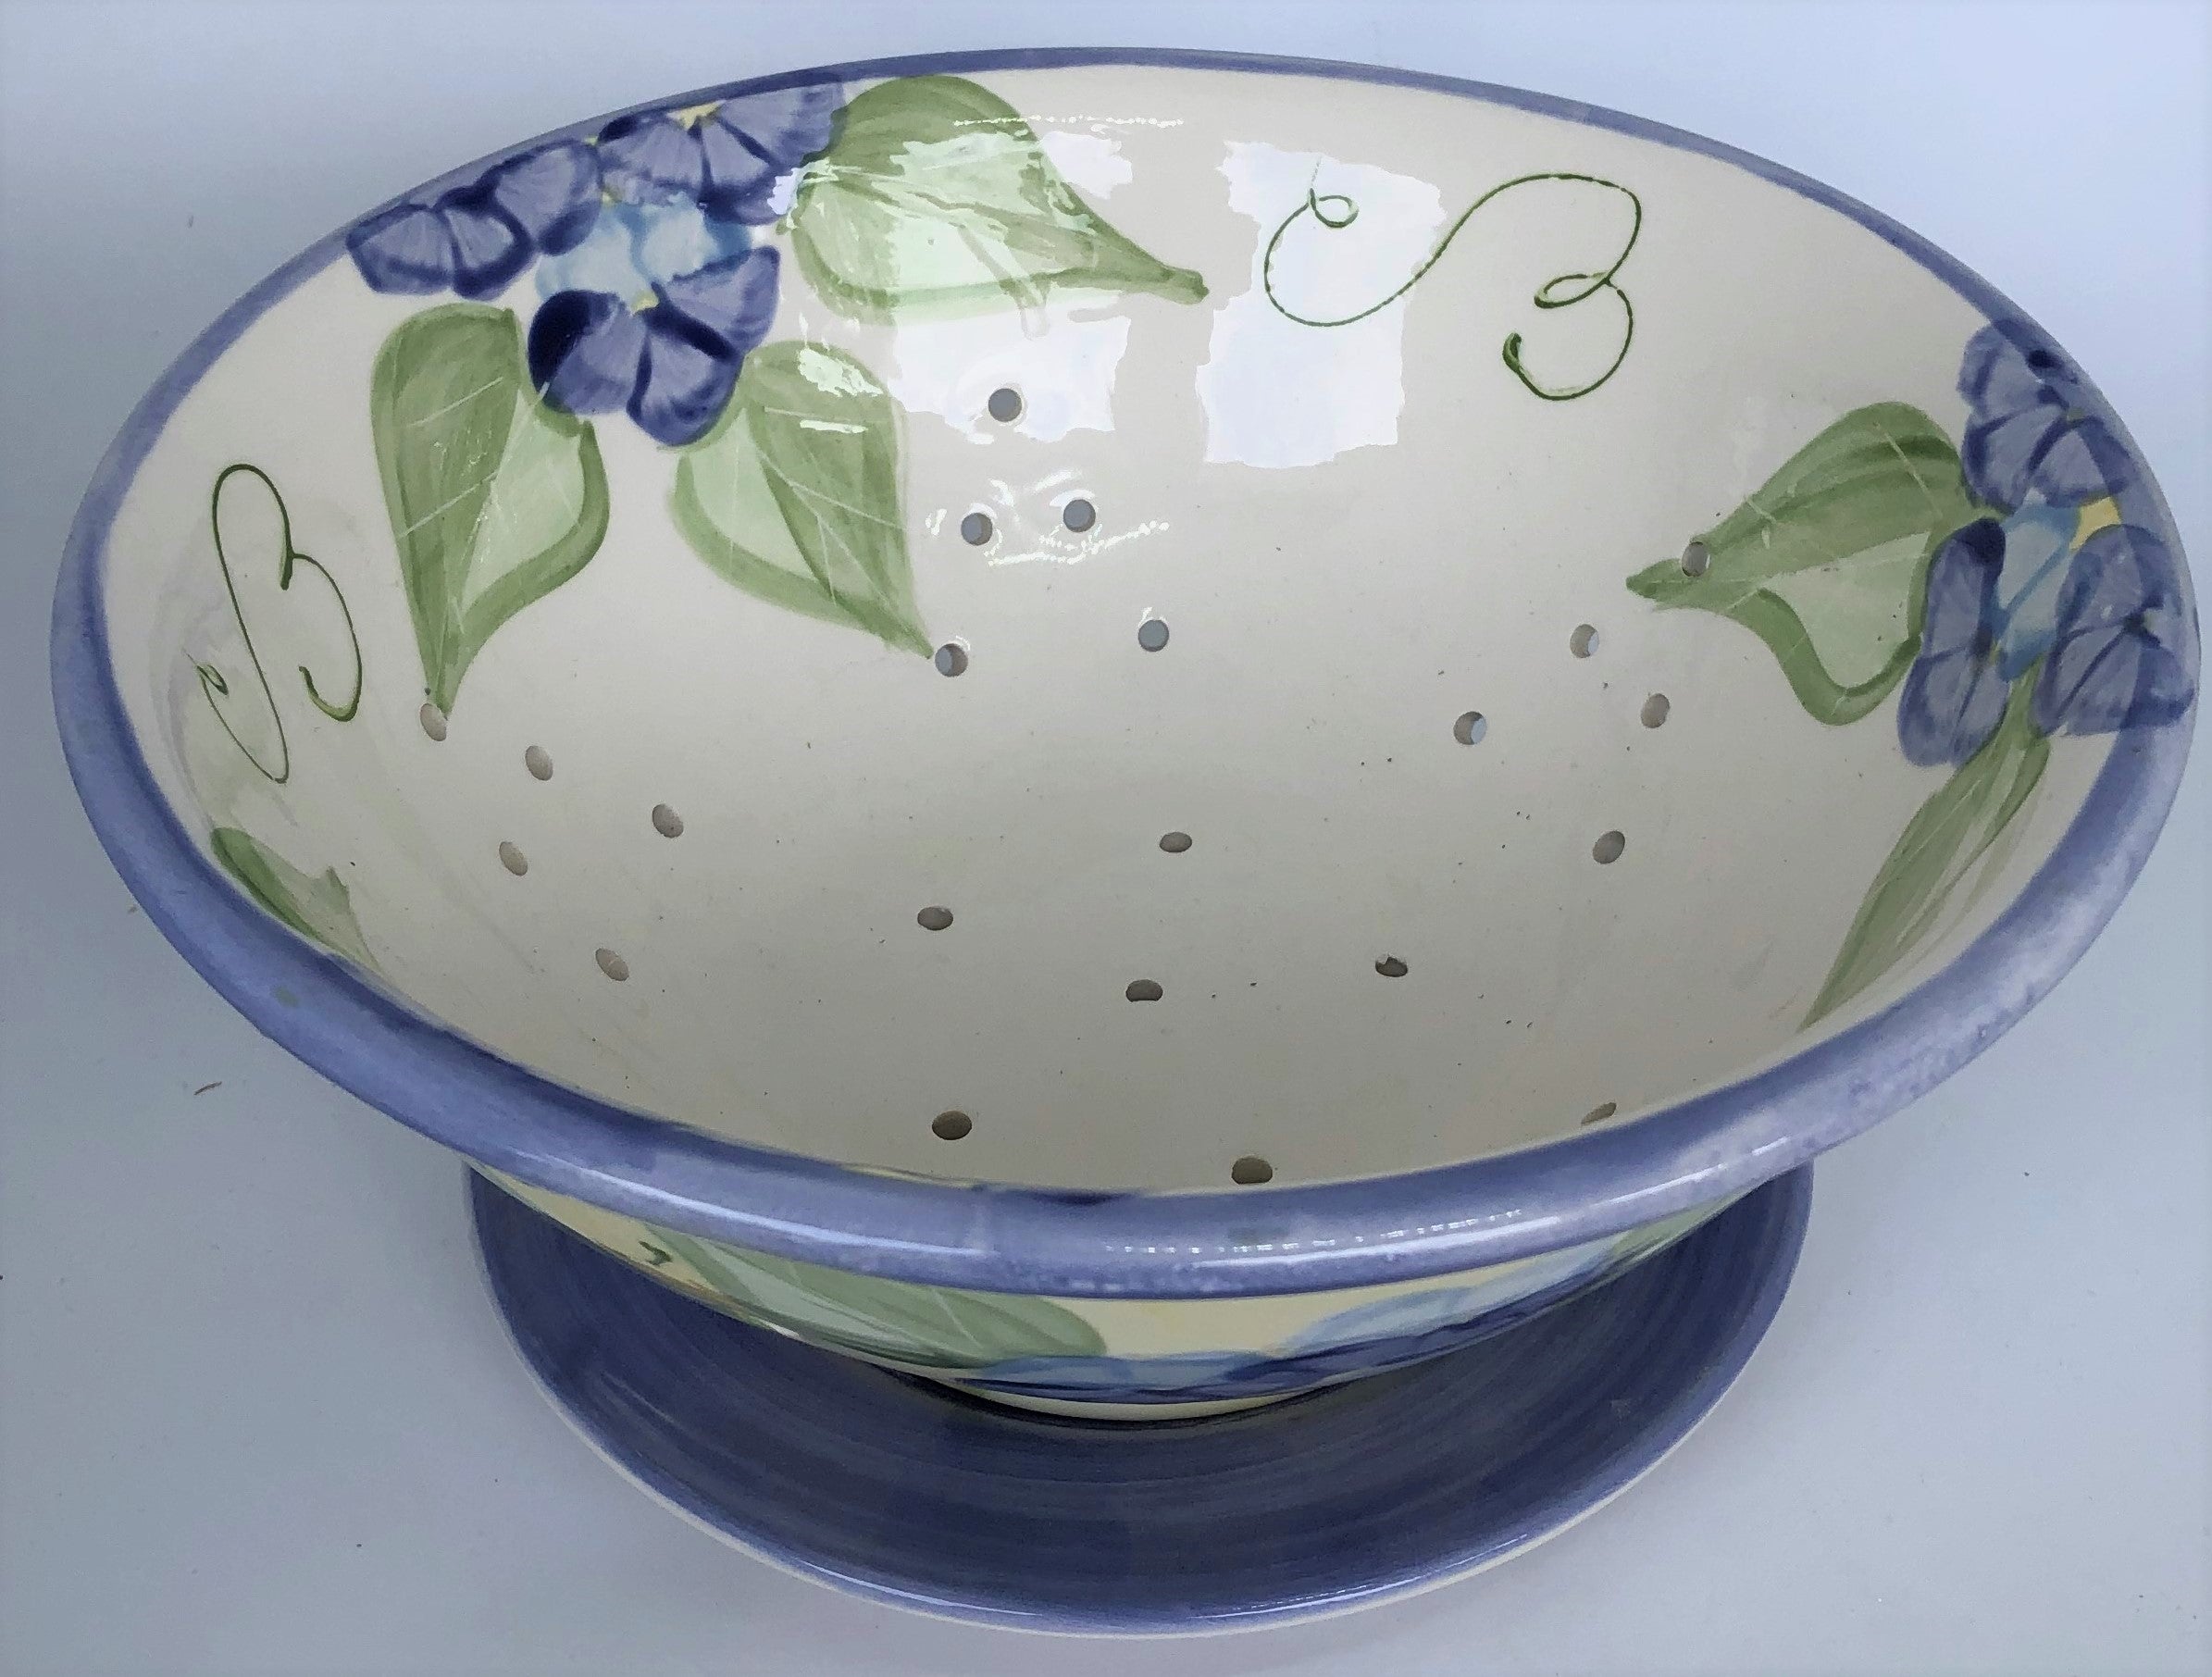 Large Berry Bowls